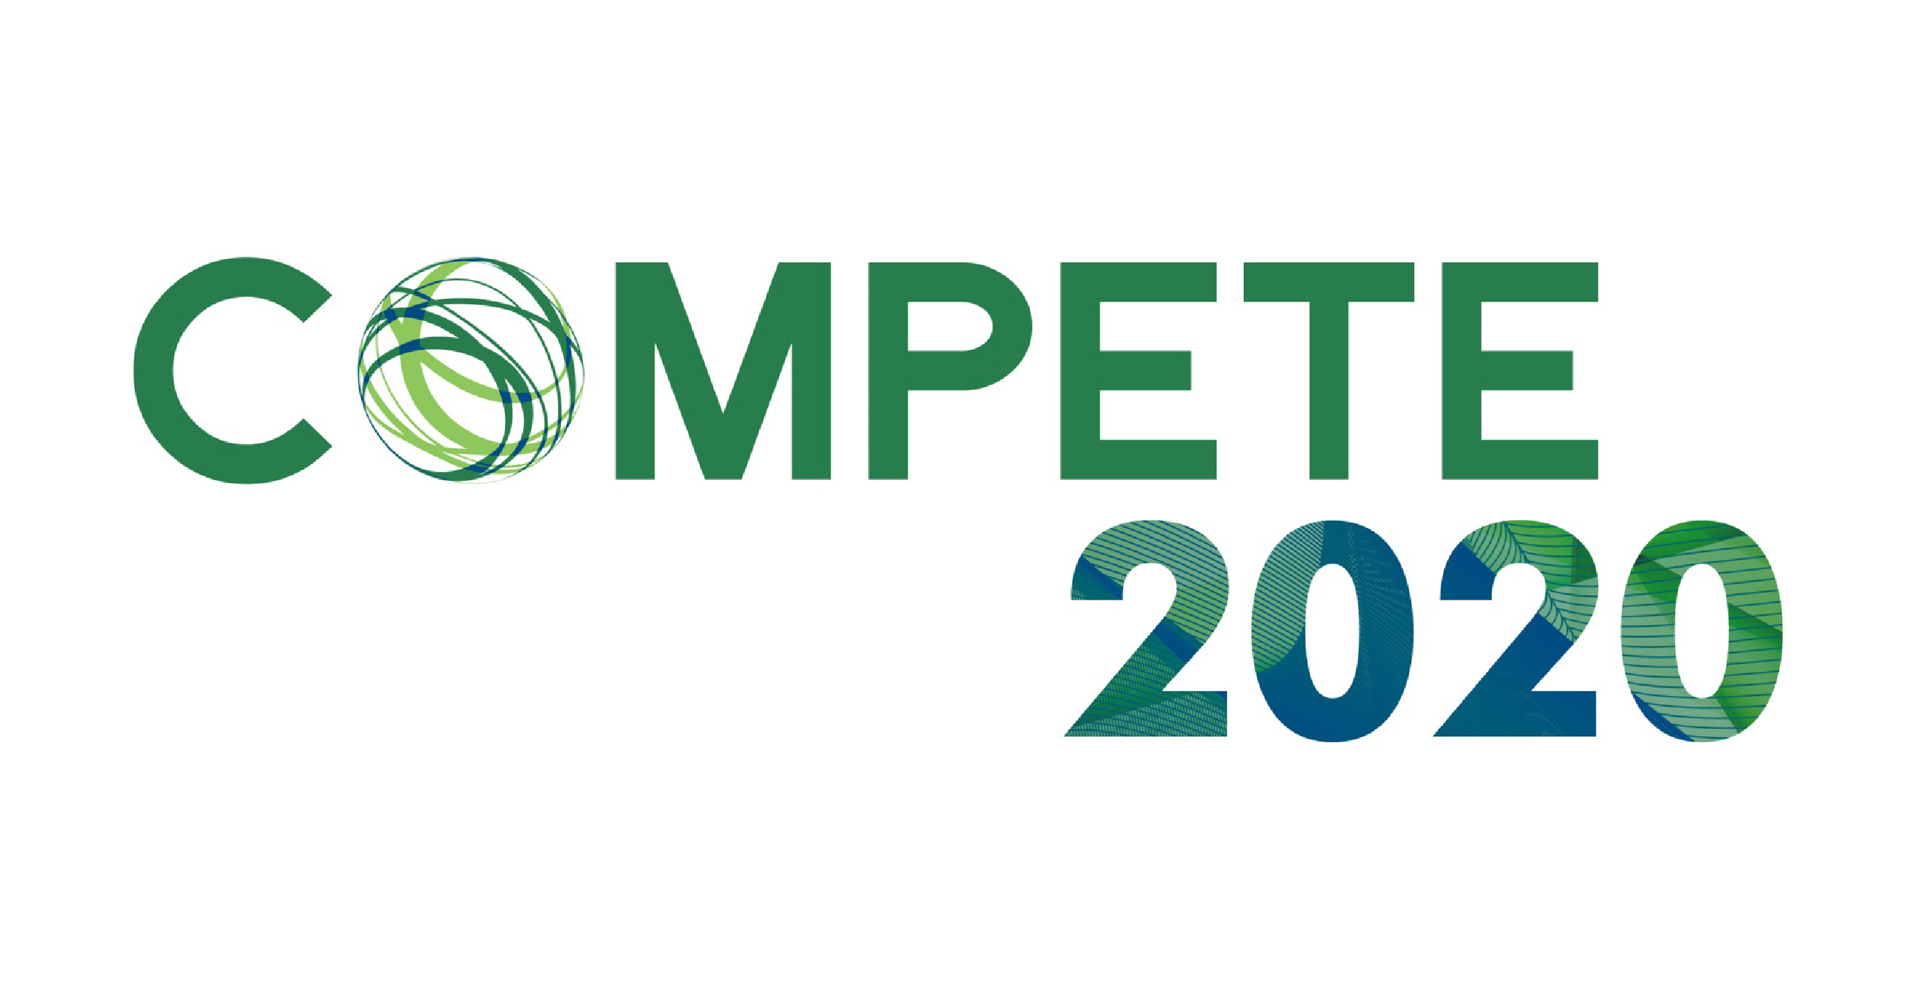 Compete. GEONEXT. Competitions 2020